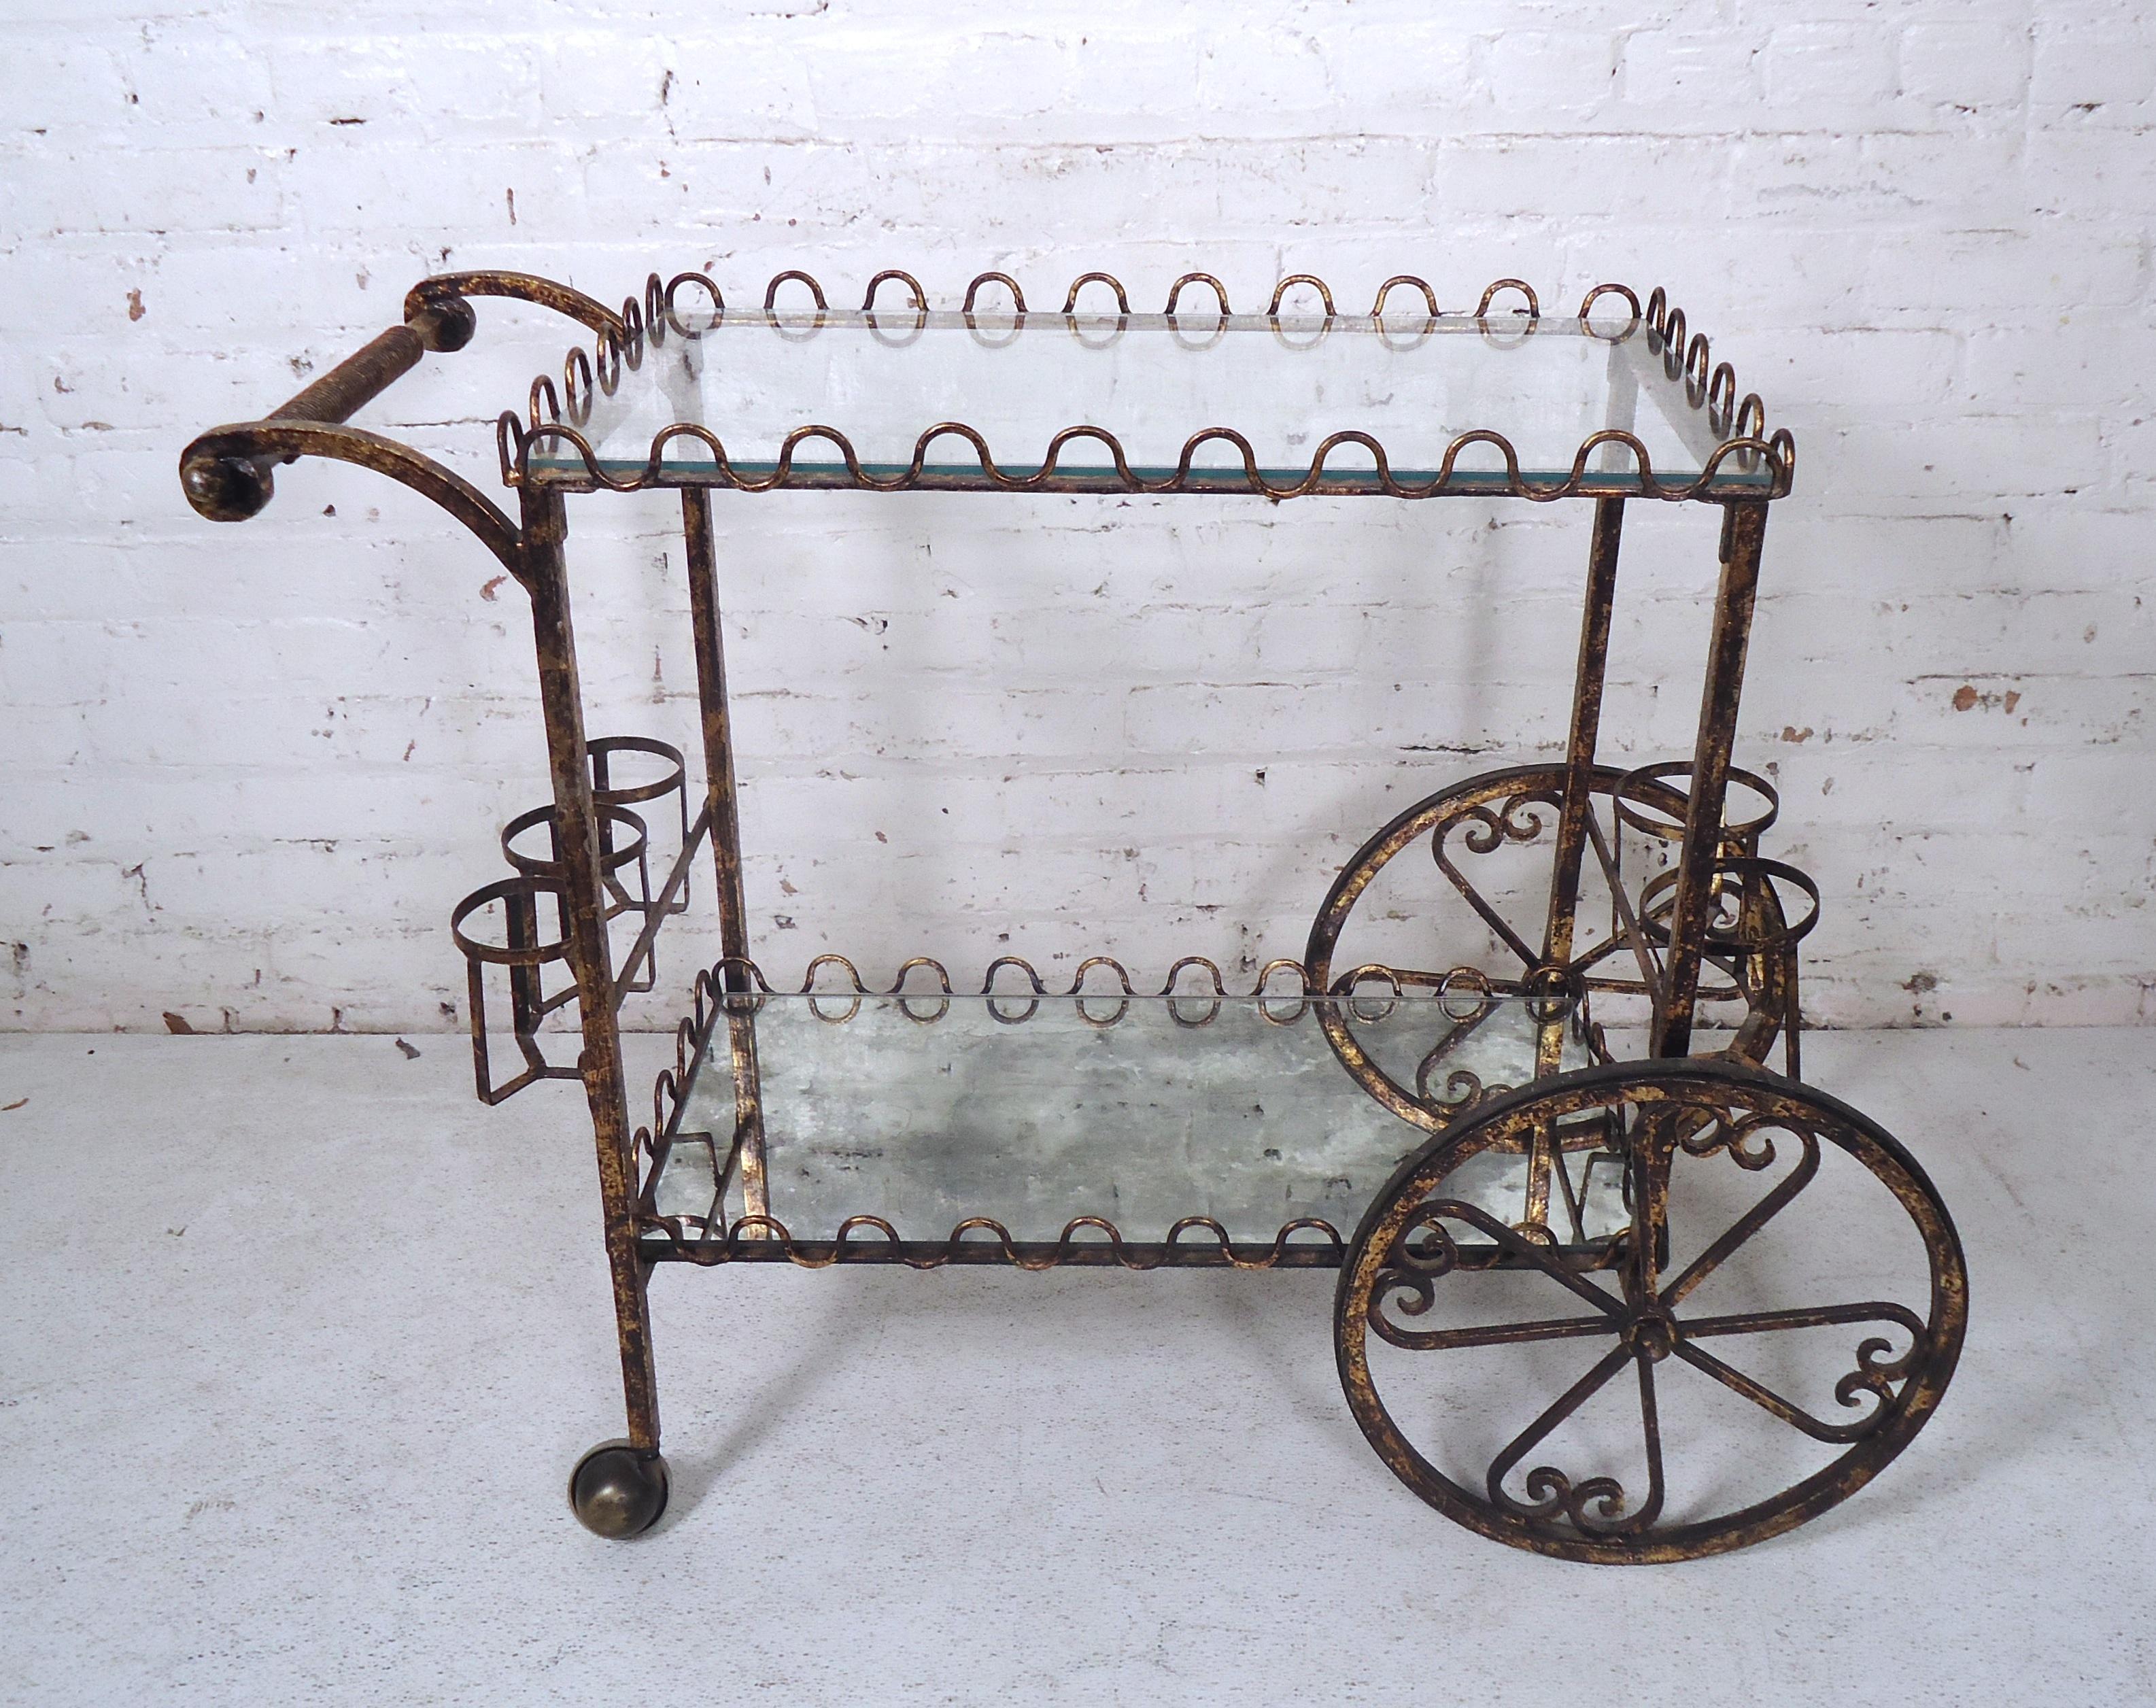 Unique Mid-Century Modern Italian bar cart featuring an iron hammered frame, set of wheels, mirrored bottom, glass top.

(Please confirm item location - NY or NJ).